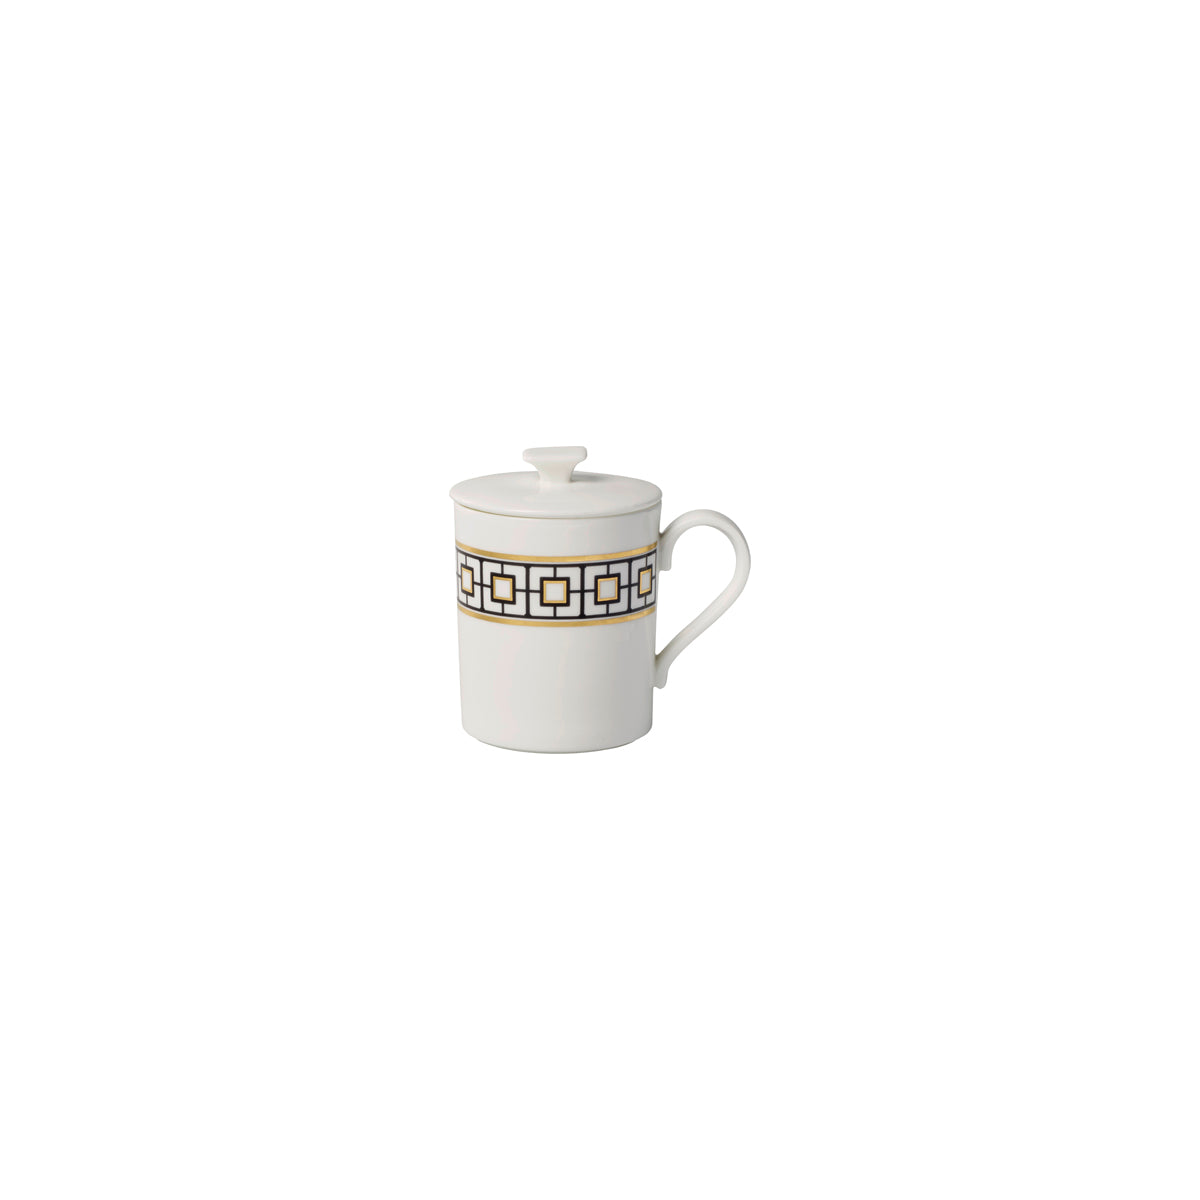 VB10-4483-4855 Villeroy And Boch Villeroy And Boch Metrochic Gifts Mug with Lid 320ml Tomkin Australia Hospitality Supplies